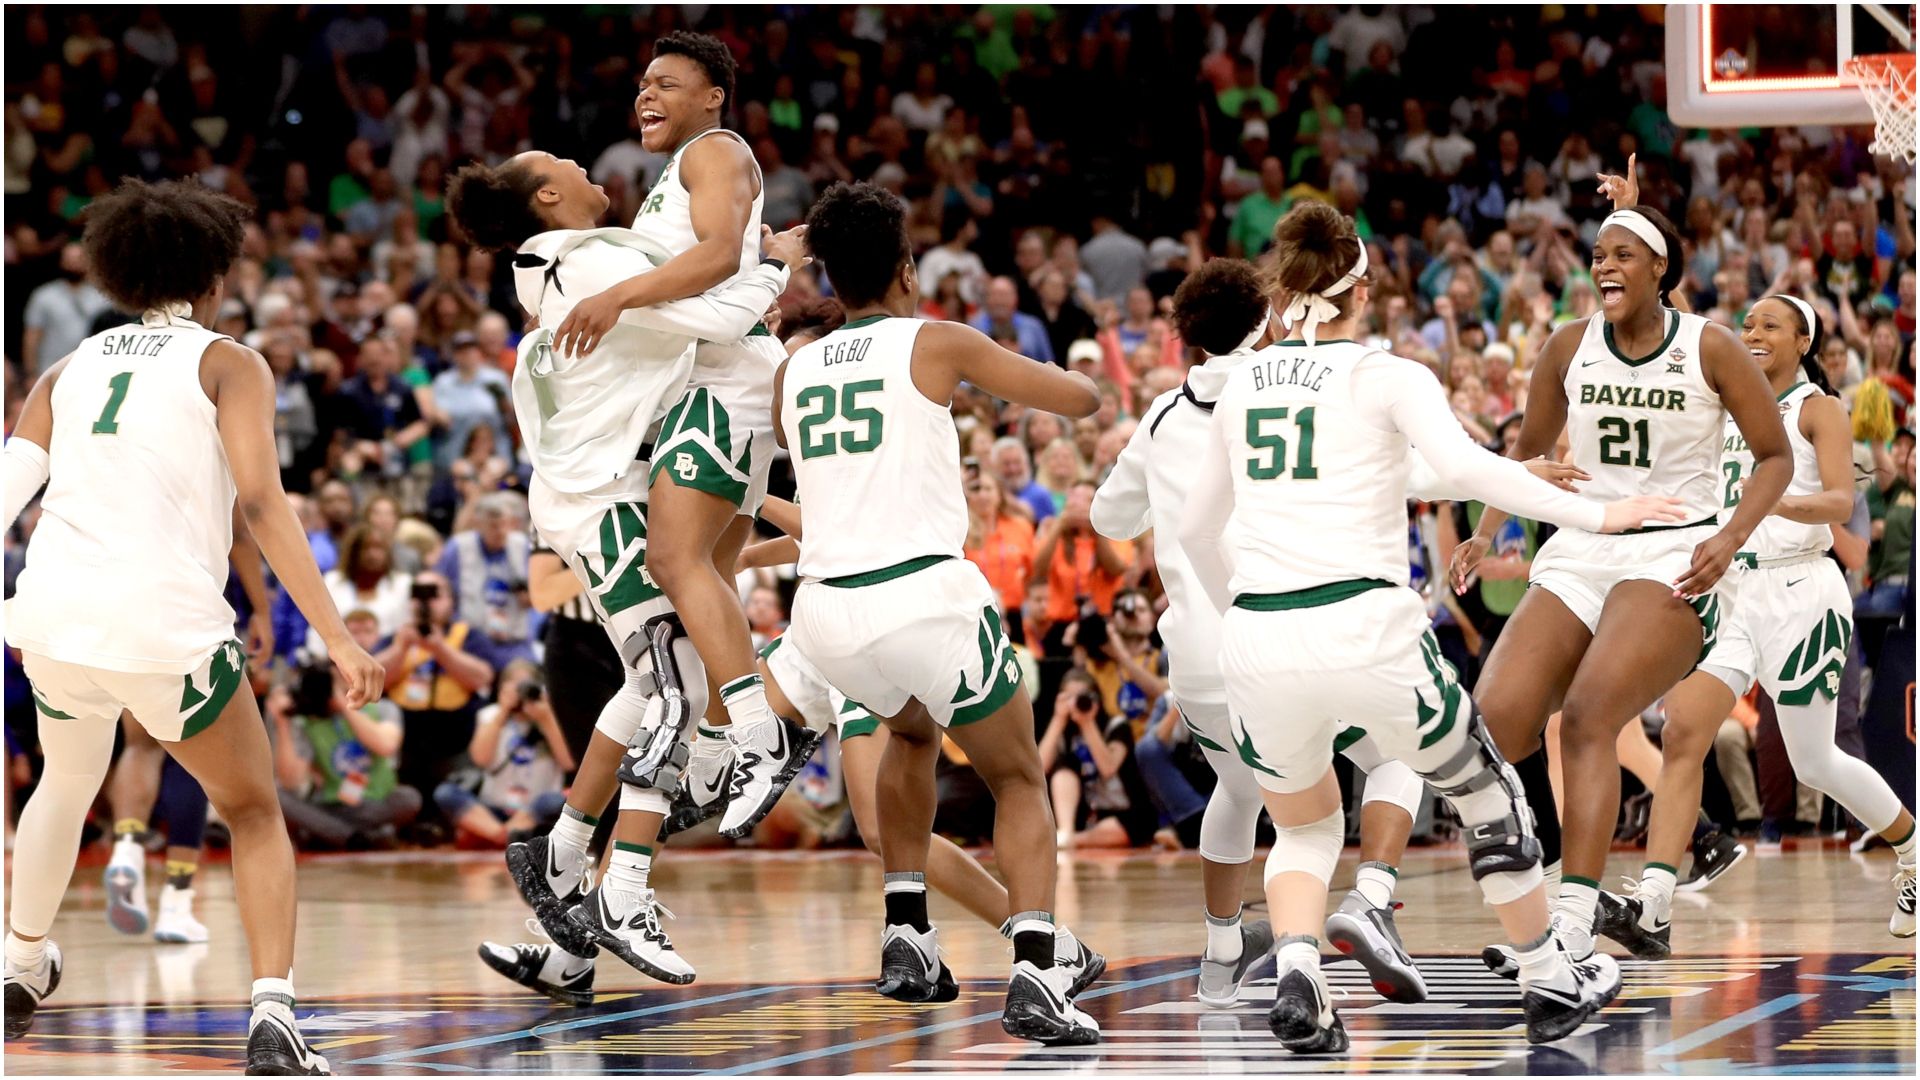 Baylor holds off Notre Dame's comeback to win championship - ESPN Video1920 x 1080